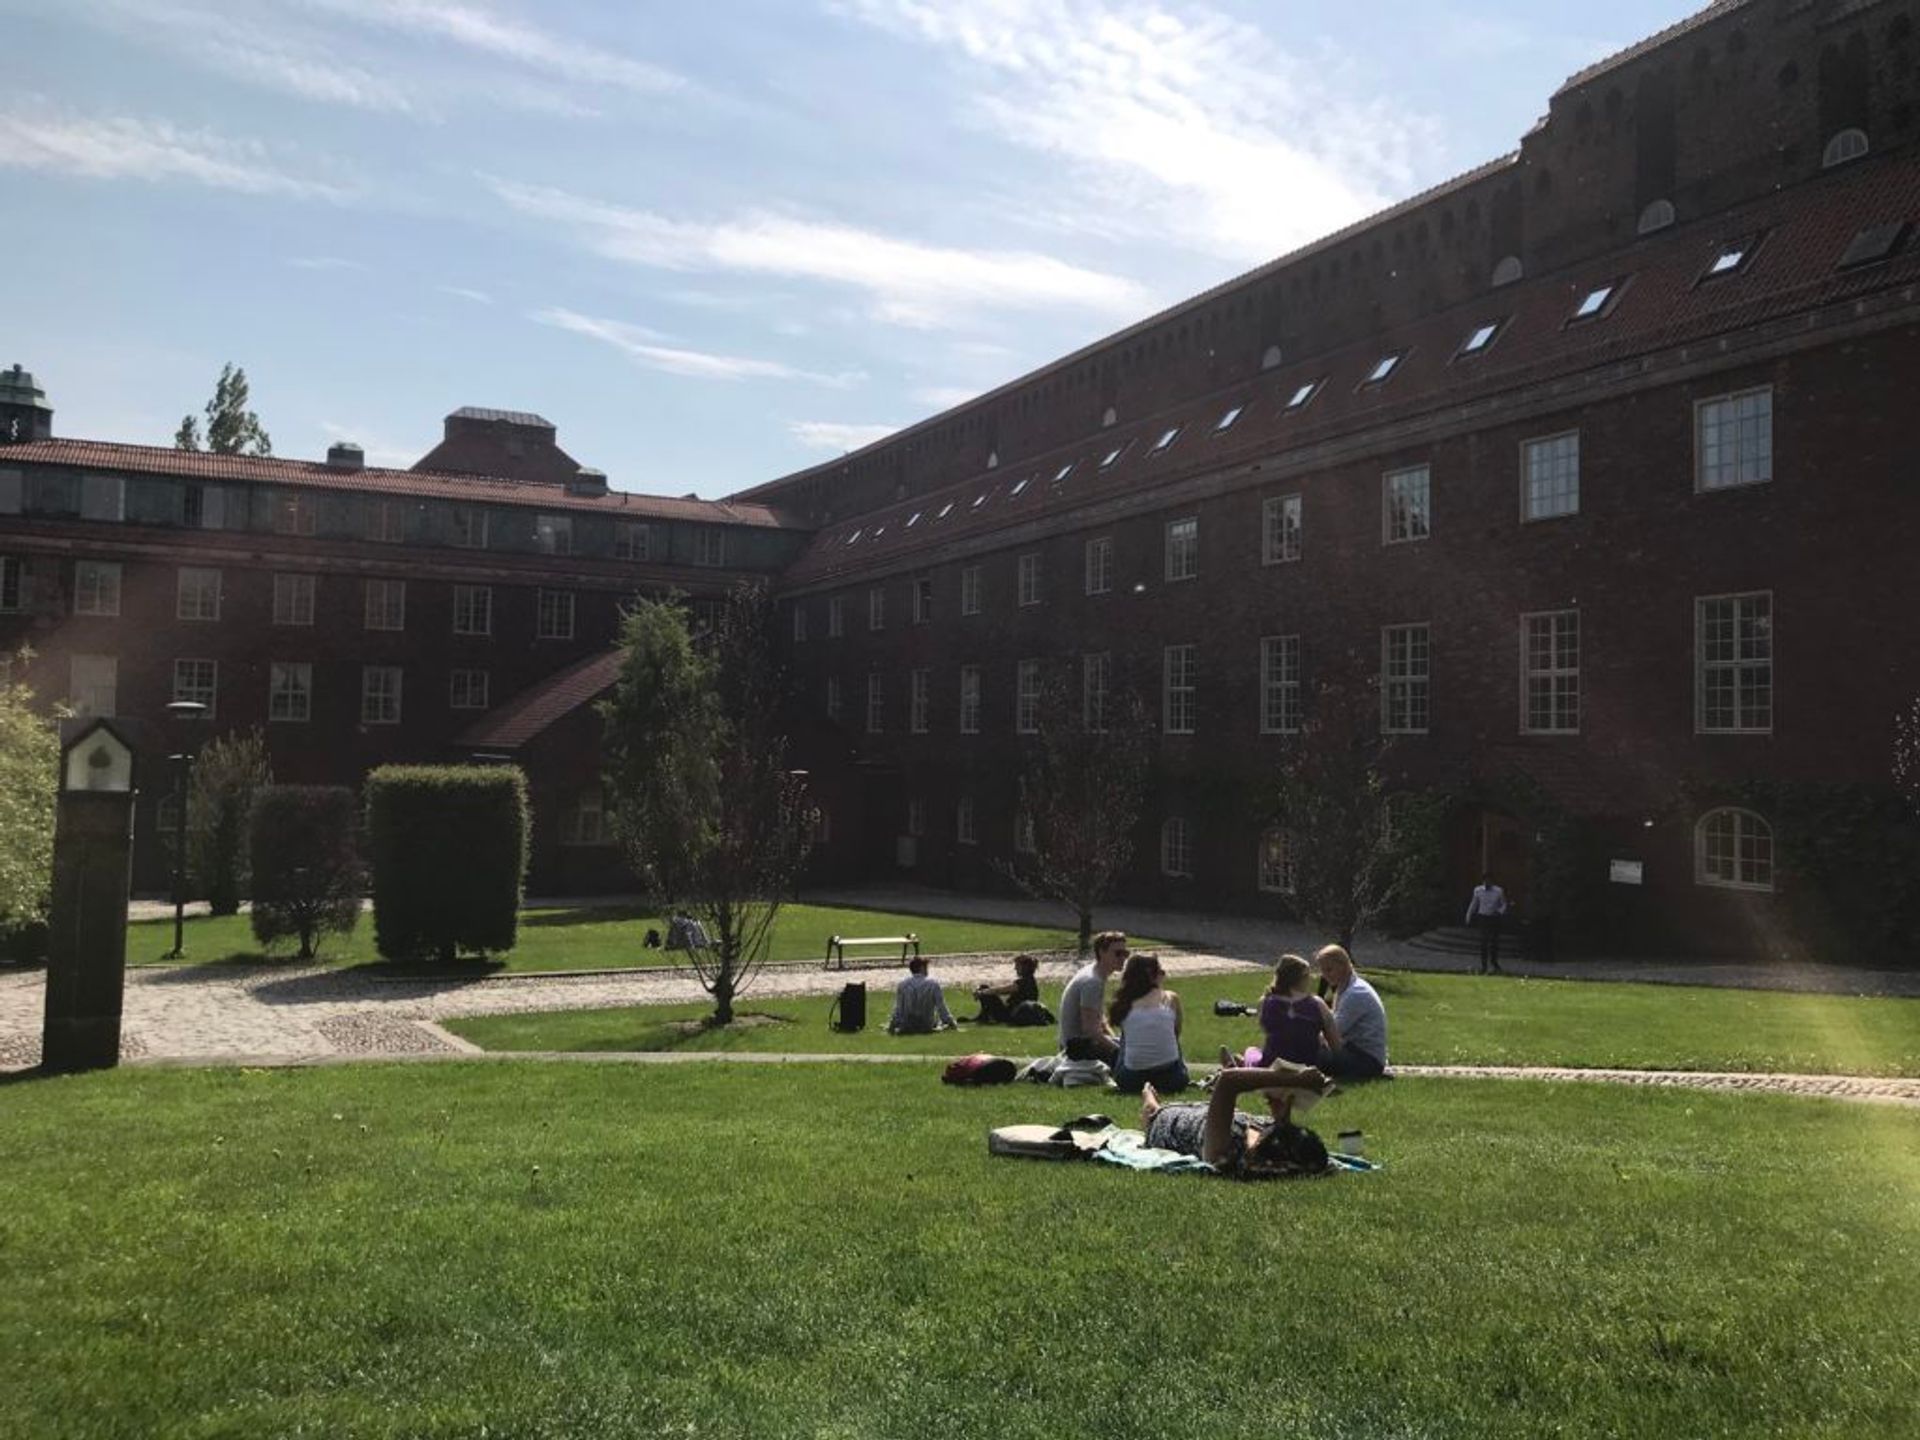 Students sitting and lying on the grass outside a university building.